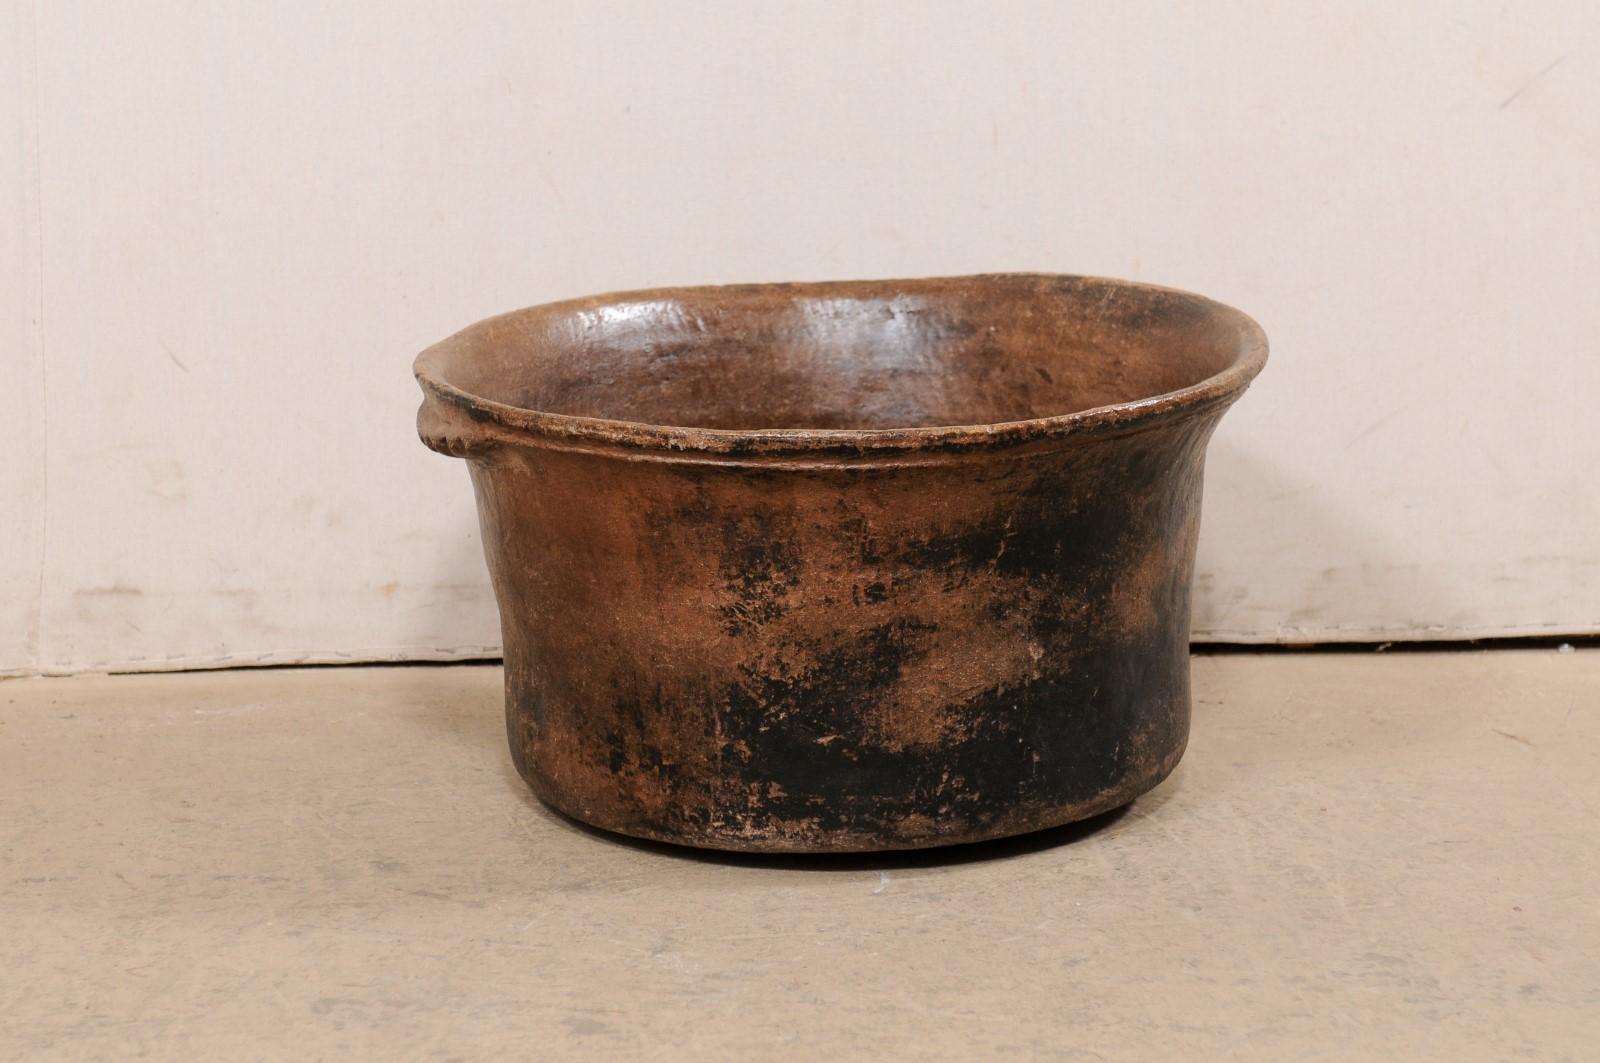 A Spanish Colonial cooking pot from the early 20th century, Central America. This antique cooking vessel has been made of clay, is round-shaped and flanked with two shallow handles with scalloped texture. The warm brown clay has a wonderful old